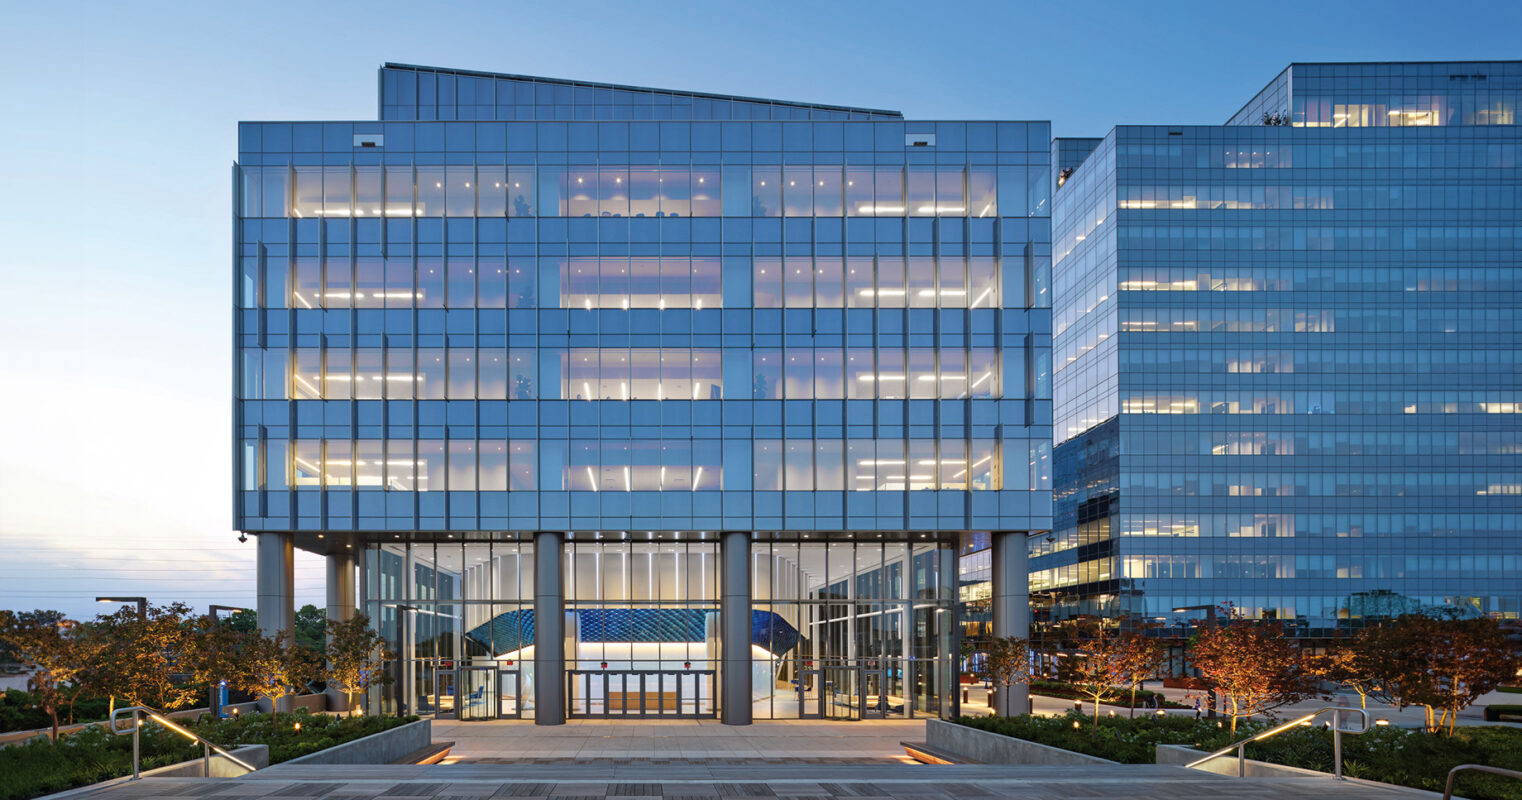 Modern glass office buildings at dusk with illuminated interiors and a calm, clear sky.